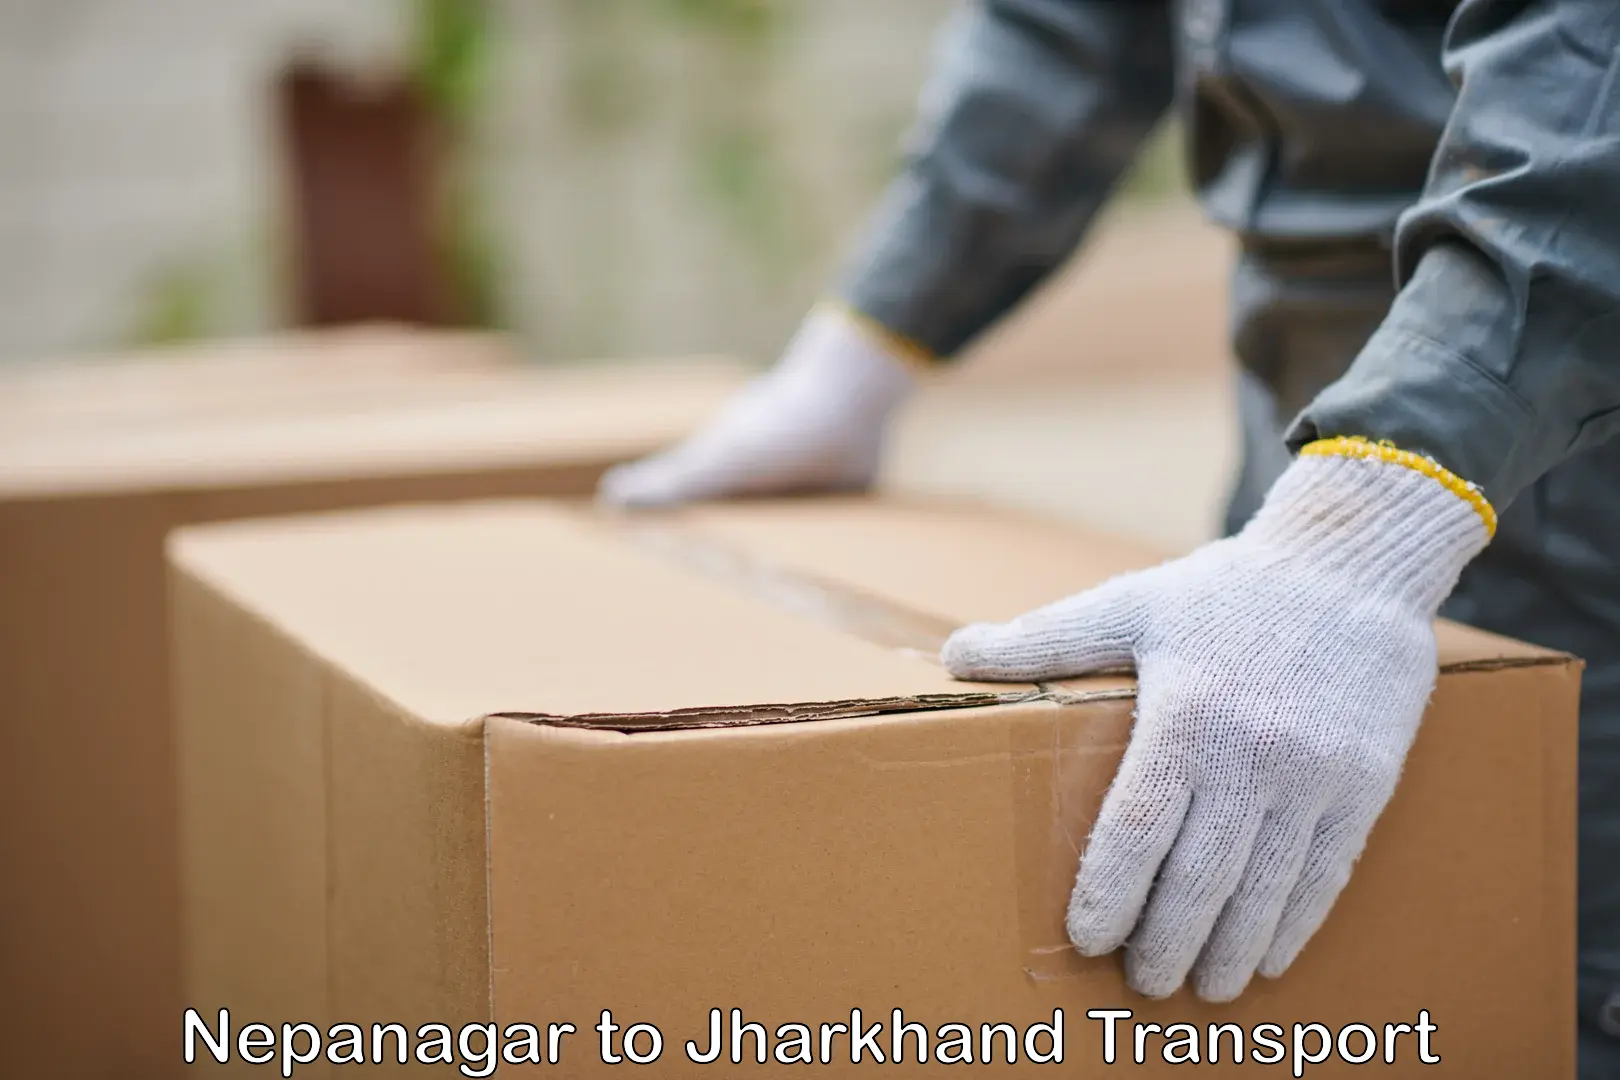 Goods delivery service Nepanagar to Jharkhand